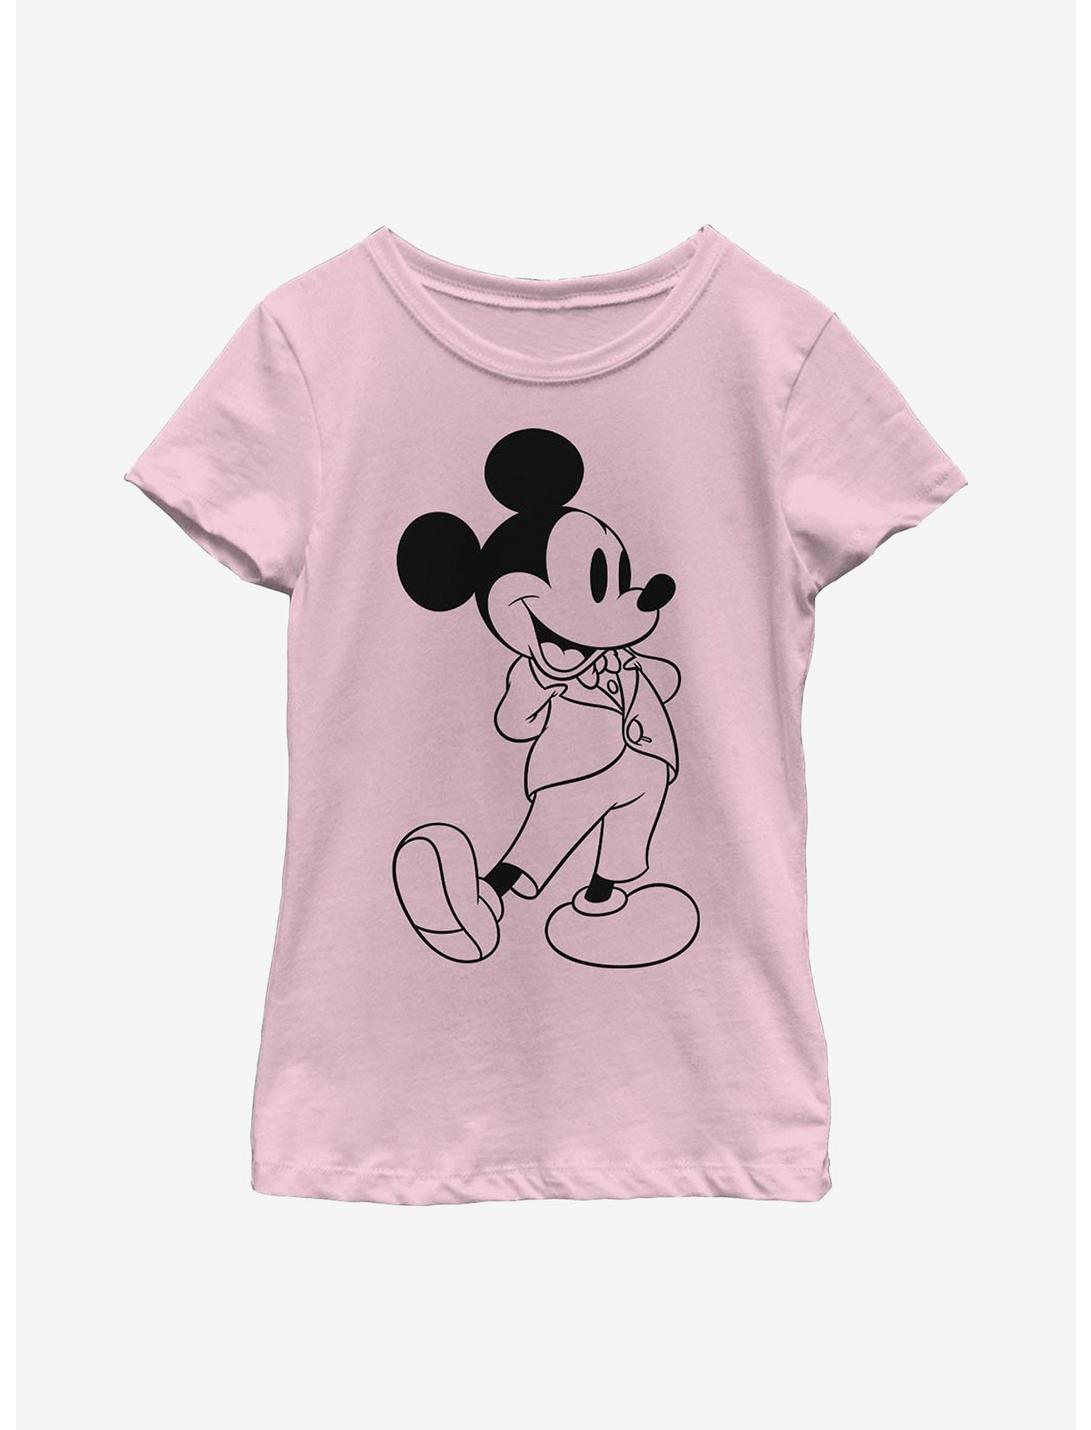 Disney Mickey Mouse Formal Mickey Youth Girls T-Shirt, PINK, hi-res